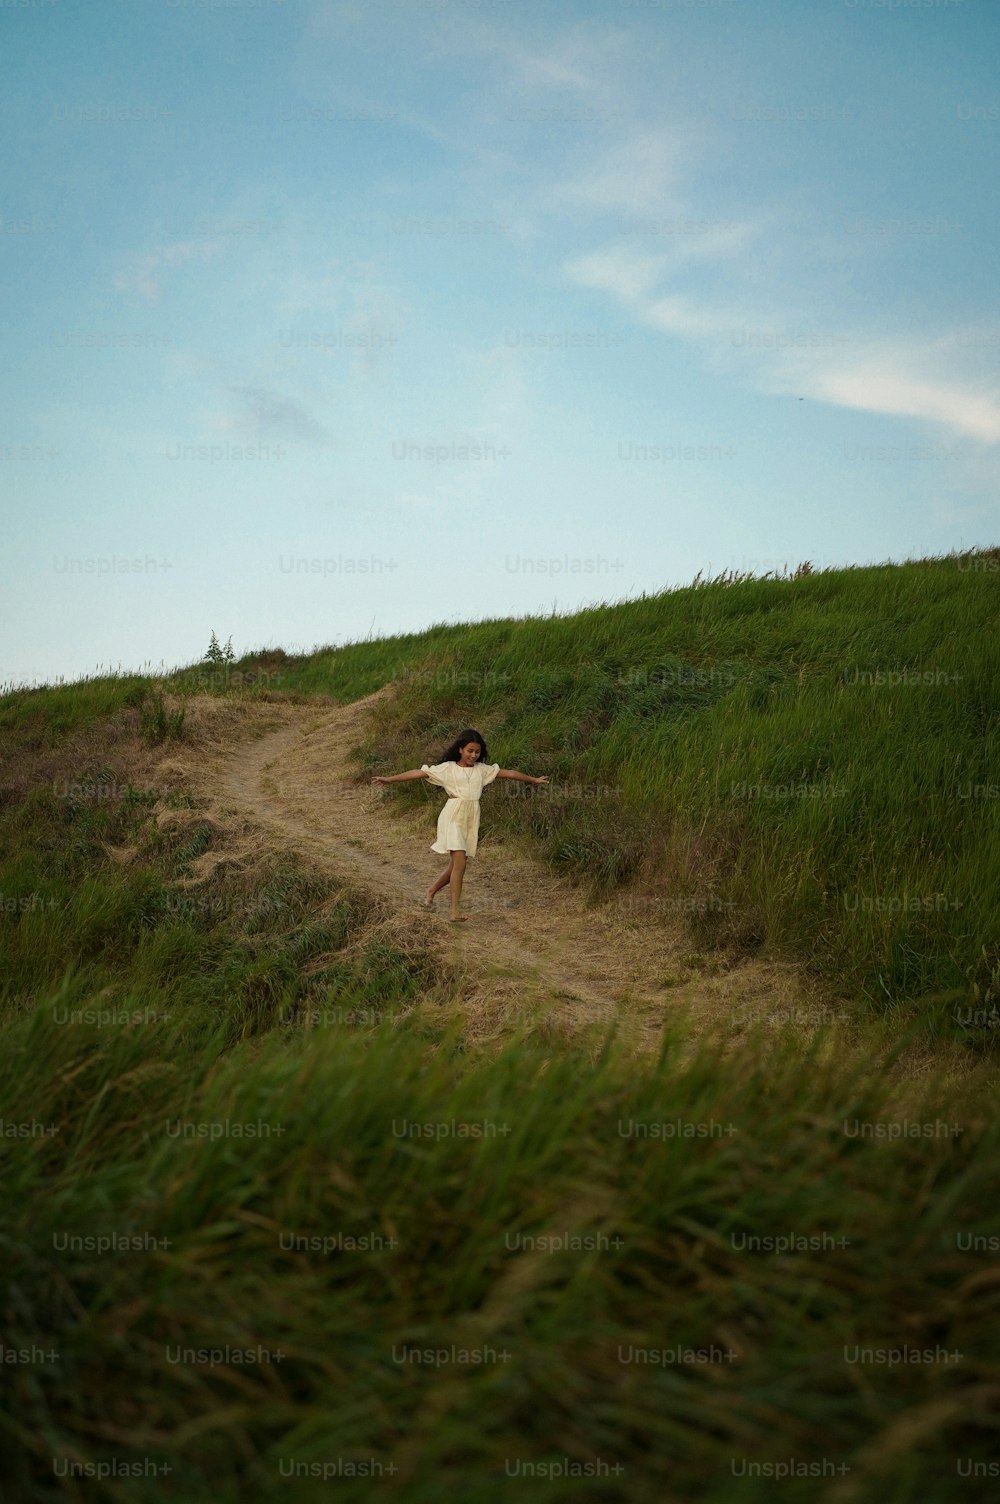 a young girl in a white dress standing on a dirt road